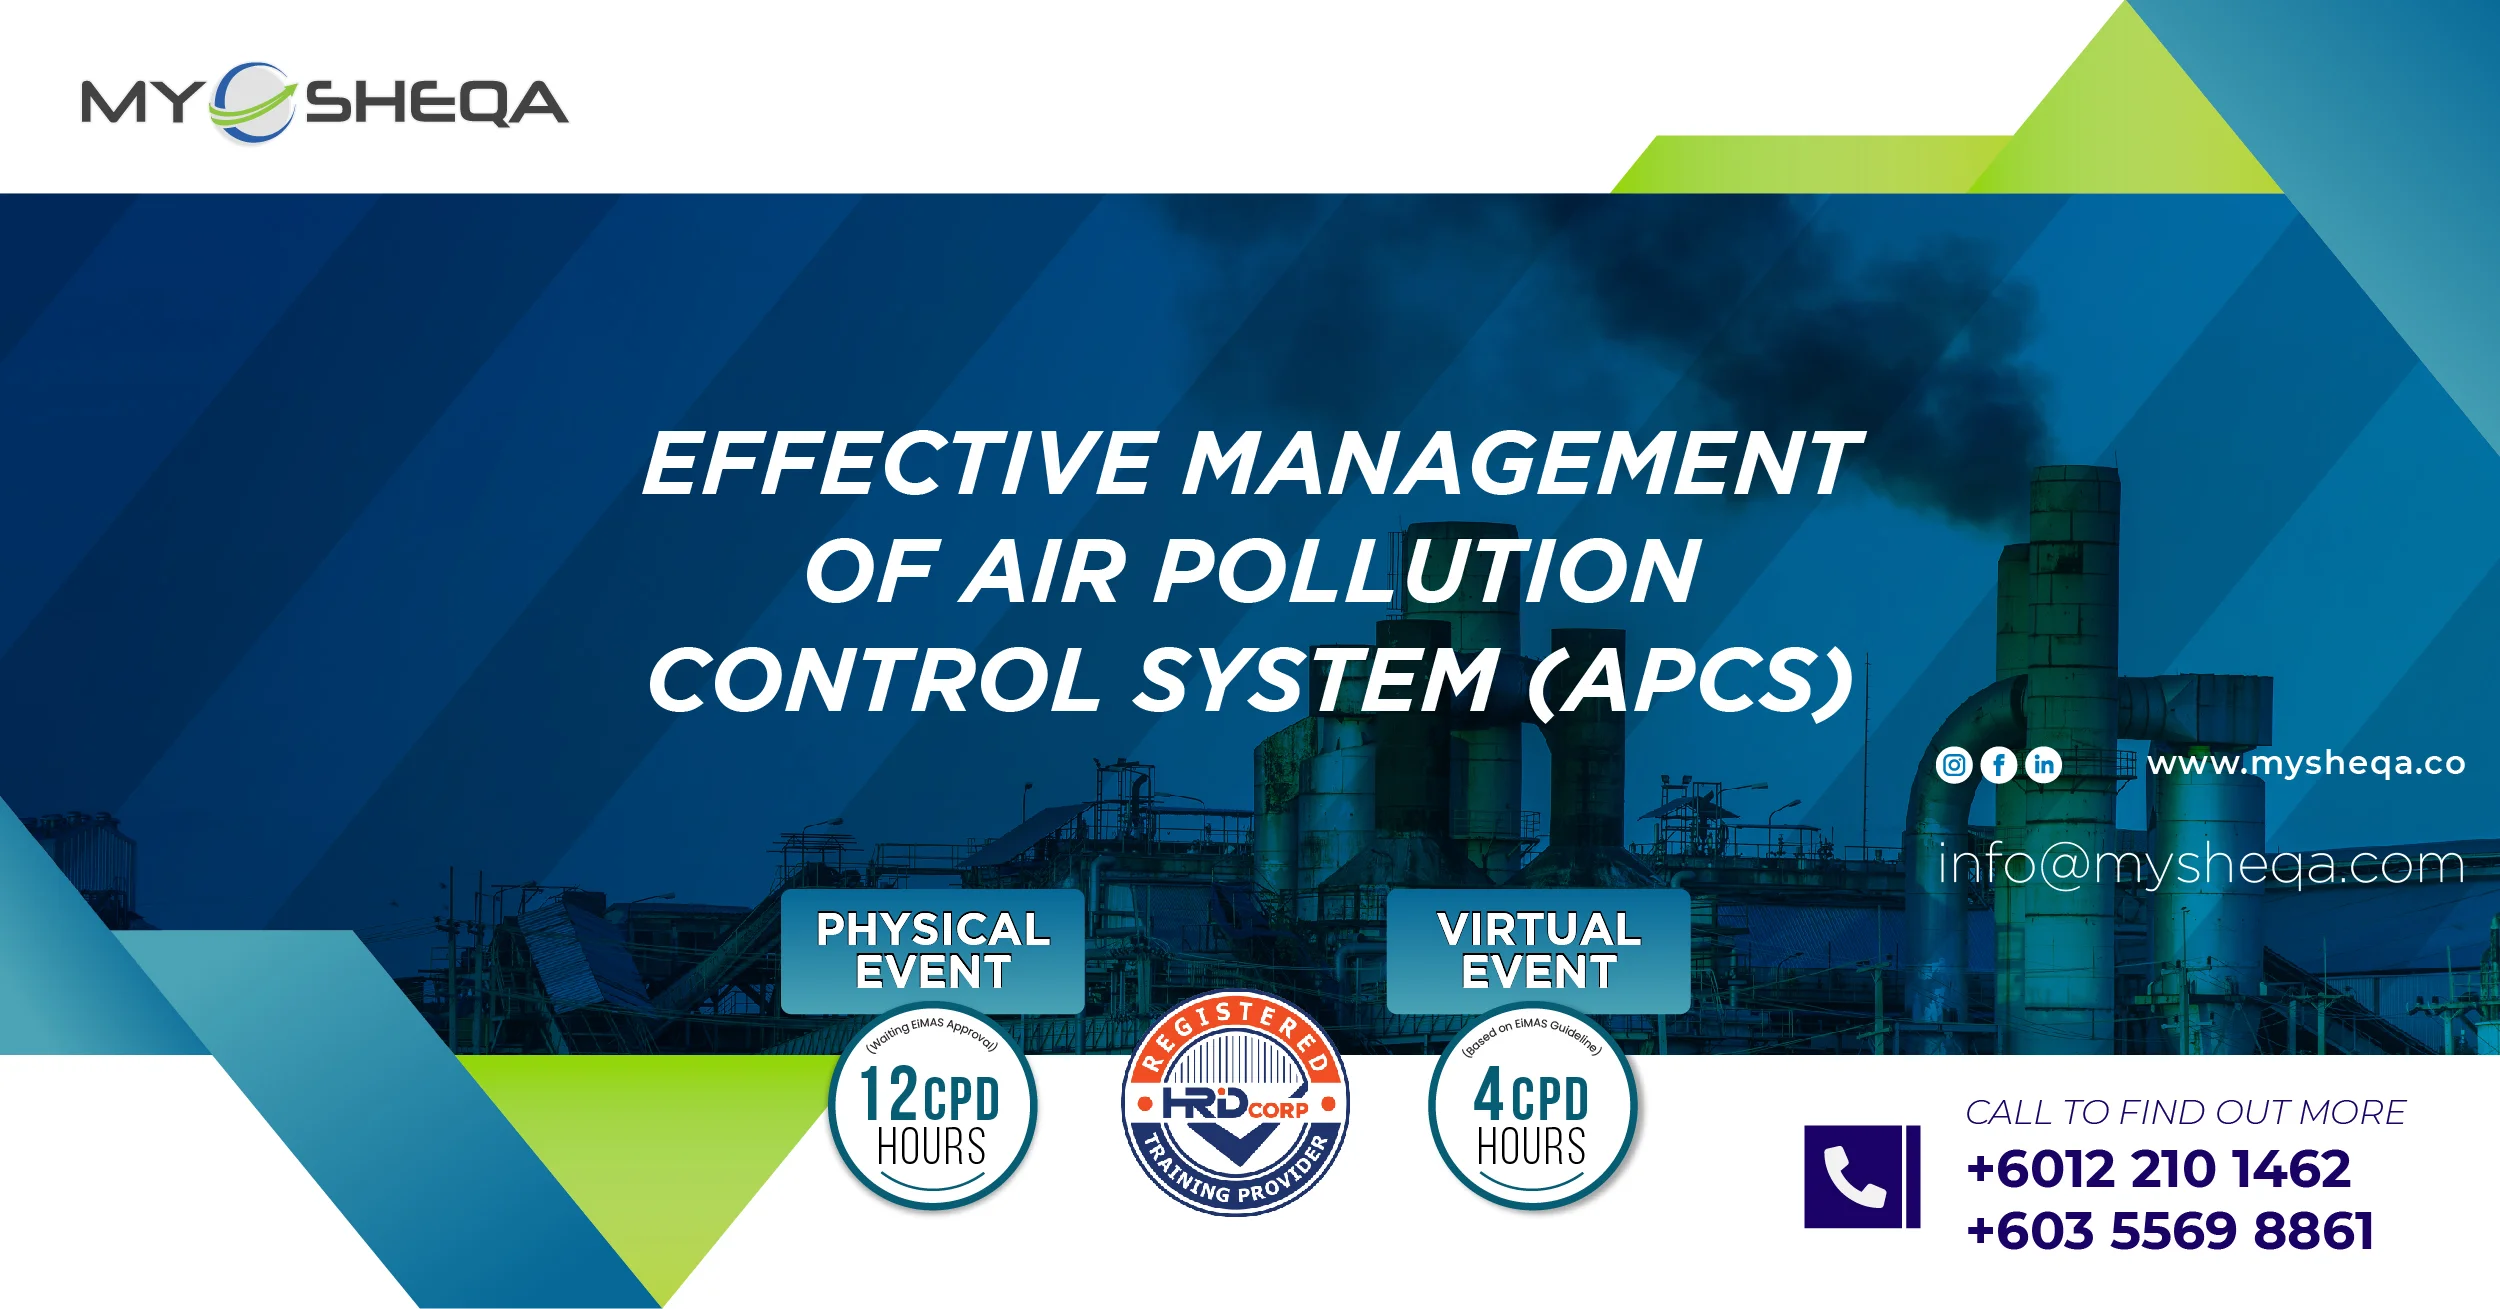 Effective Management of Air Pollution Control System (APCS)